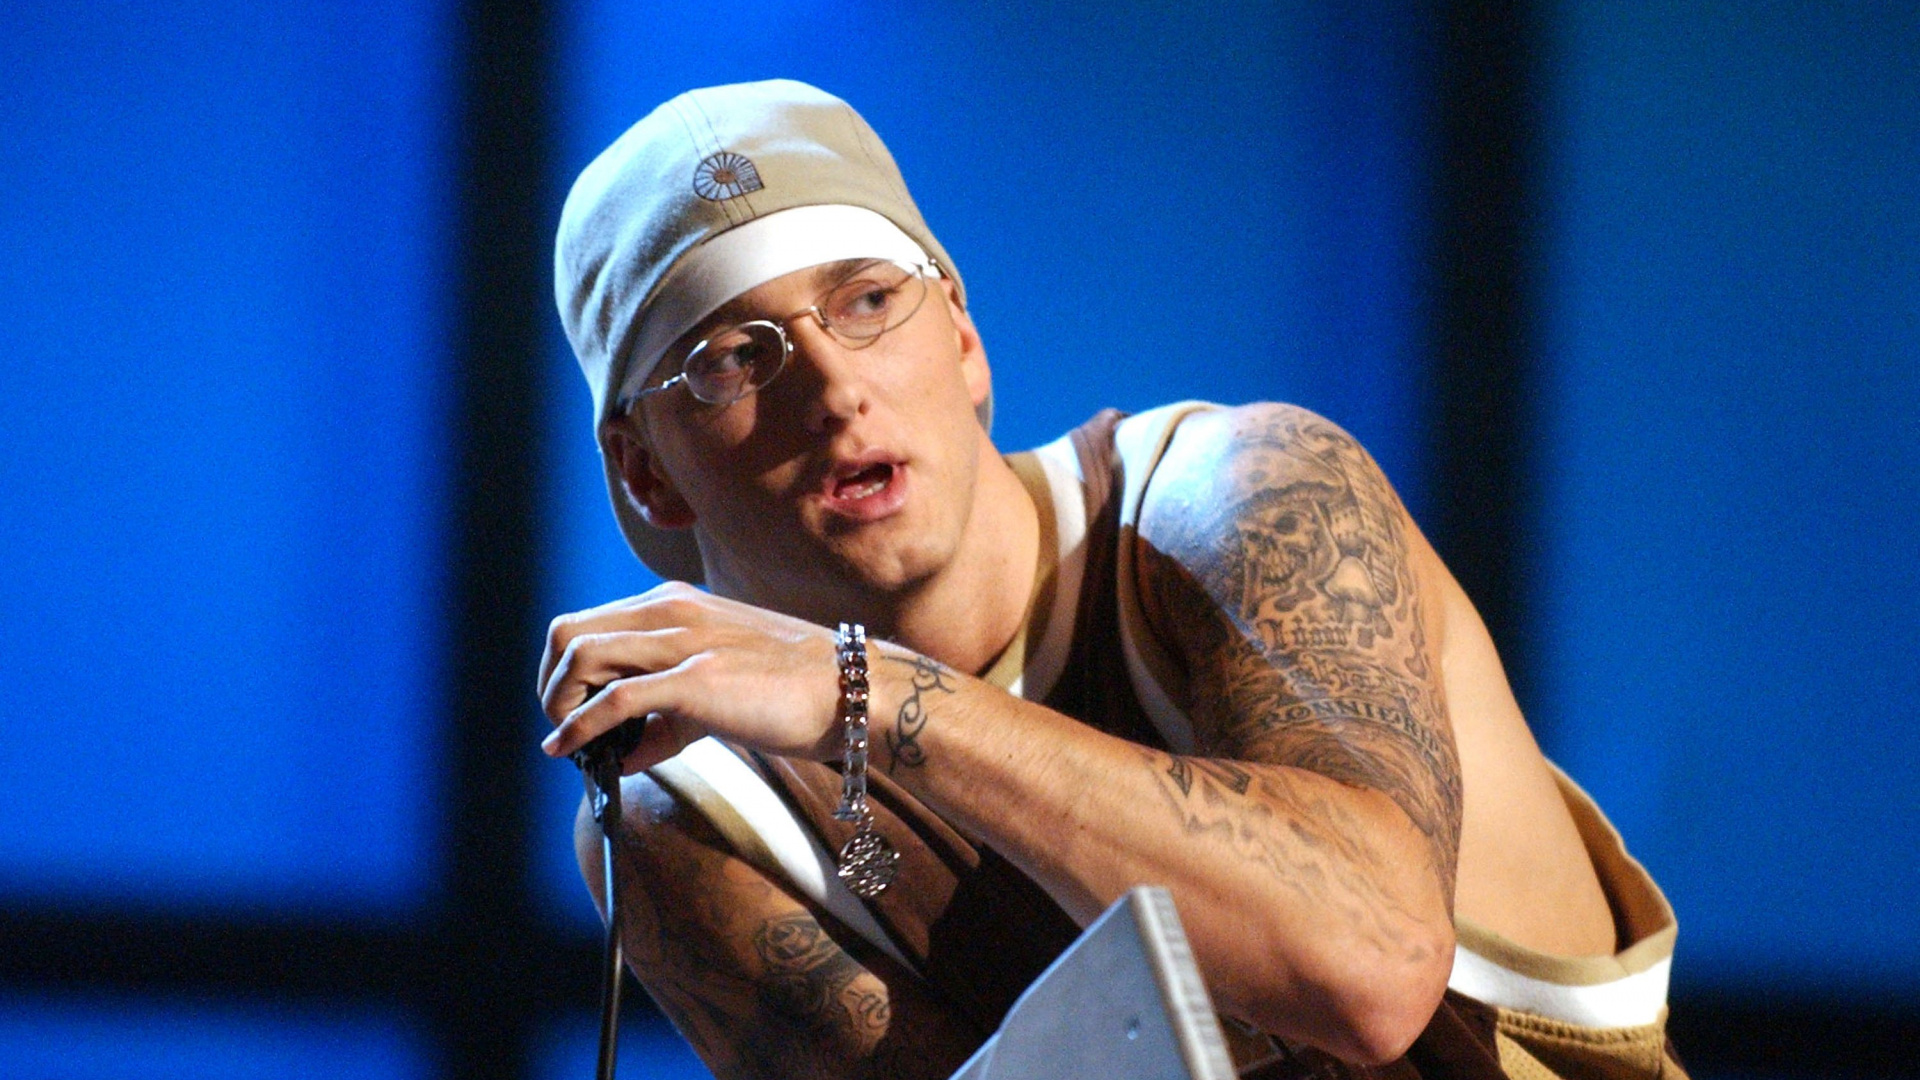 Eminem, Arm, Performance, Music, Muscle. Wallpaper in 1920x1080 Resolution